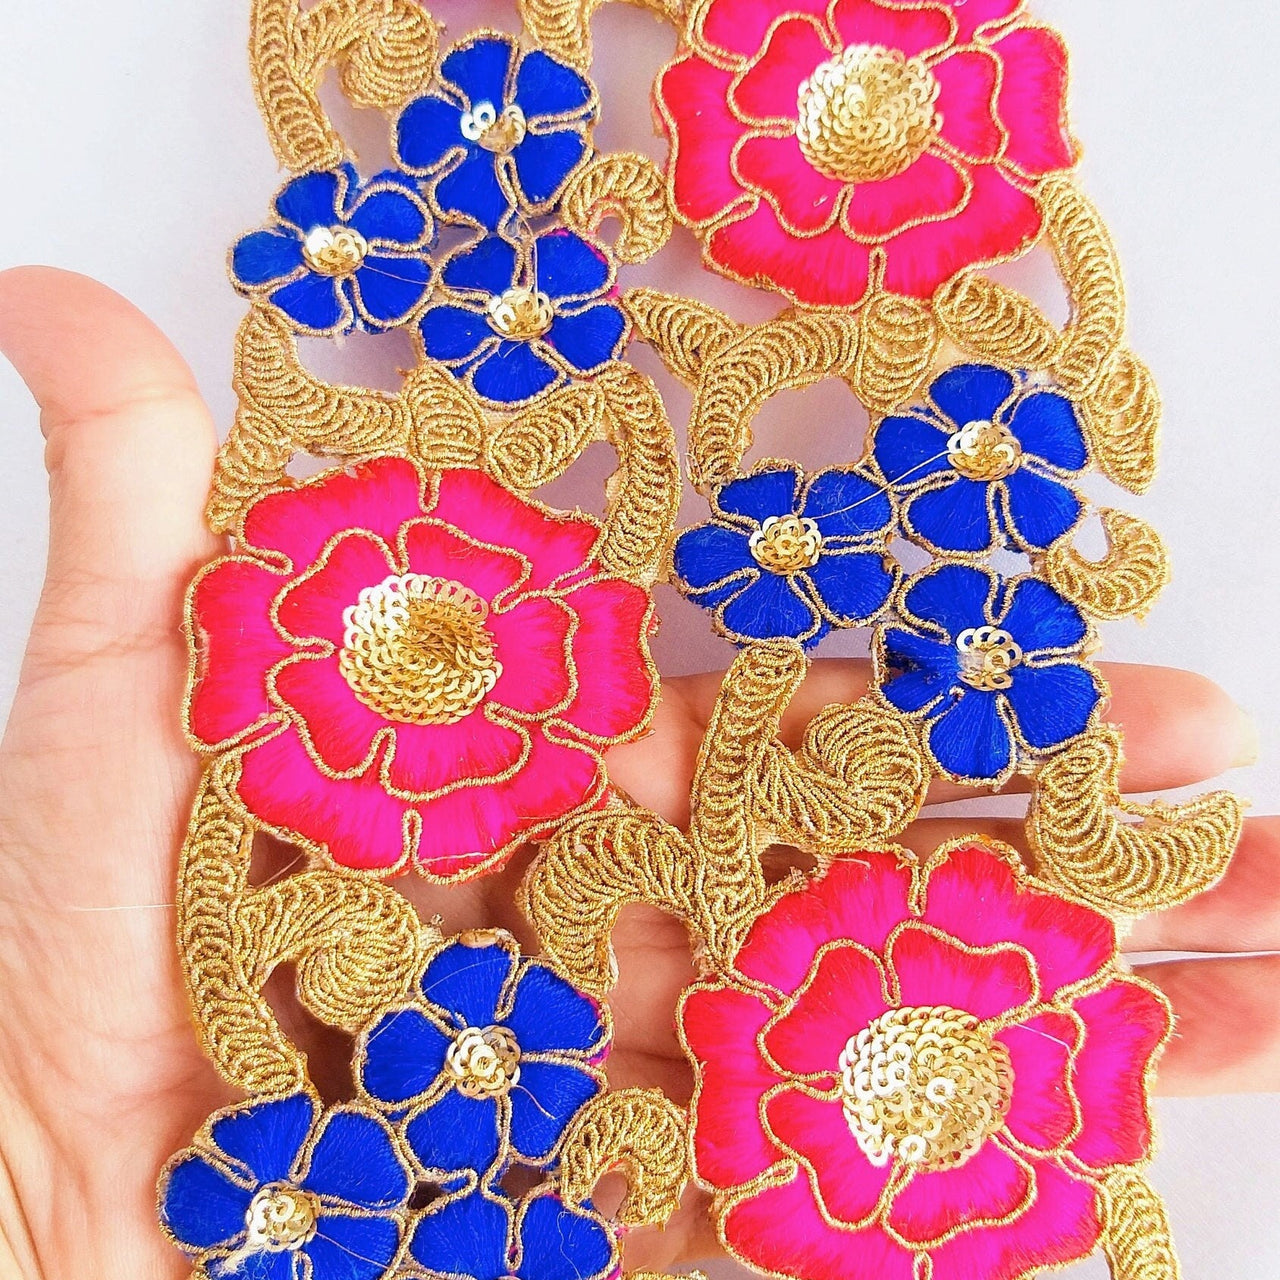 Floral Embroidery Indian Trim With Gold Sequins, Fuchsia Pink, Blue & Gold